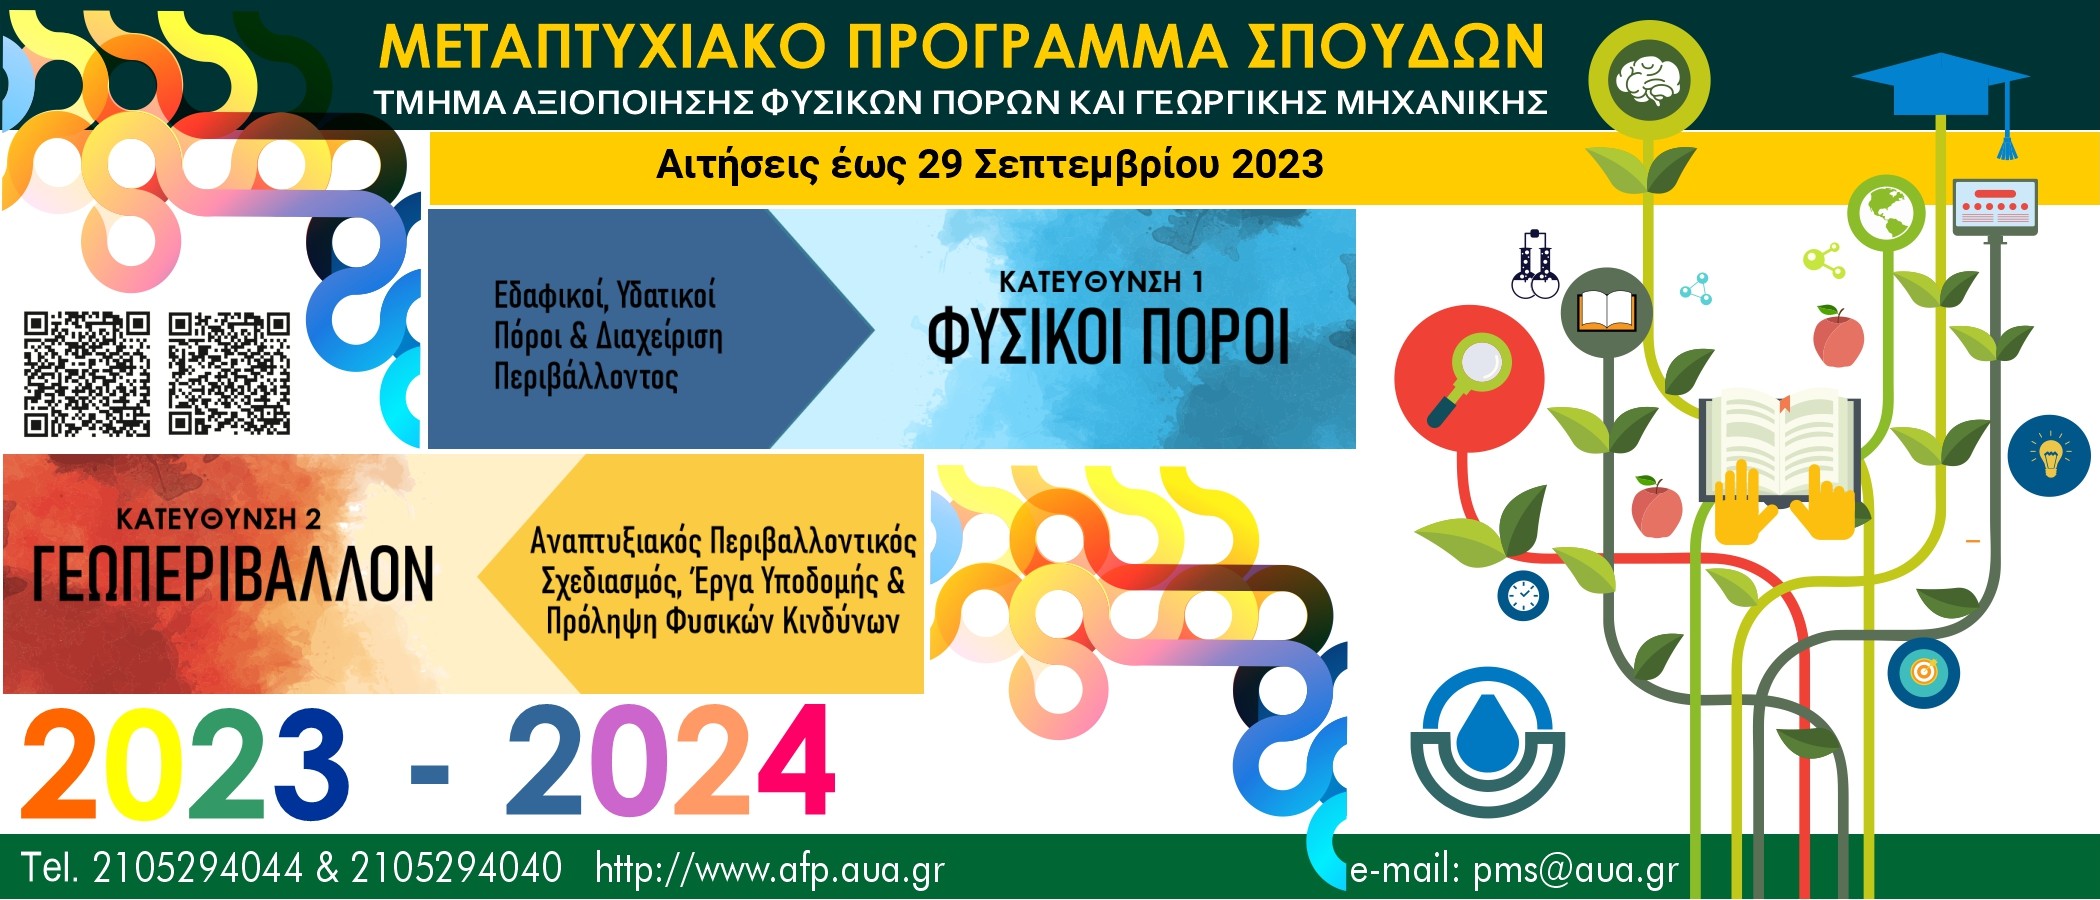 The Postgraduate Program entitled: “Natural Resources, Geoenvironment, Geoinformatics and Agricultural Engineering"